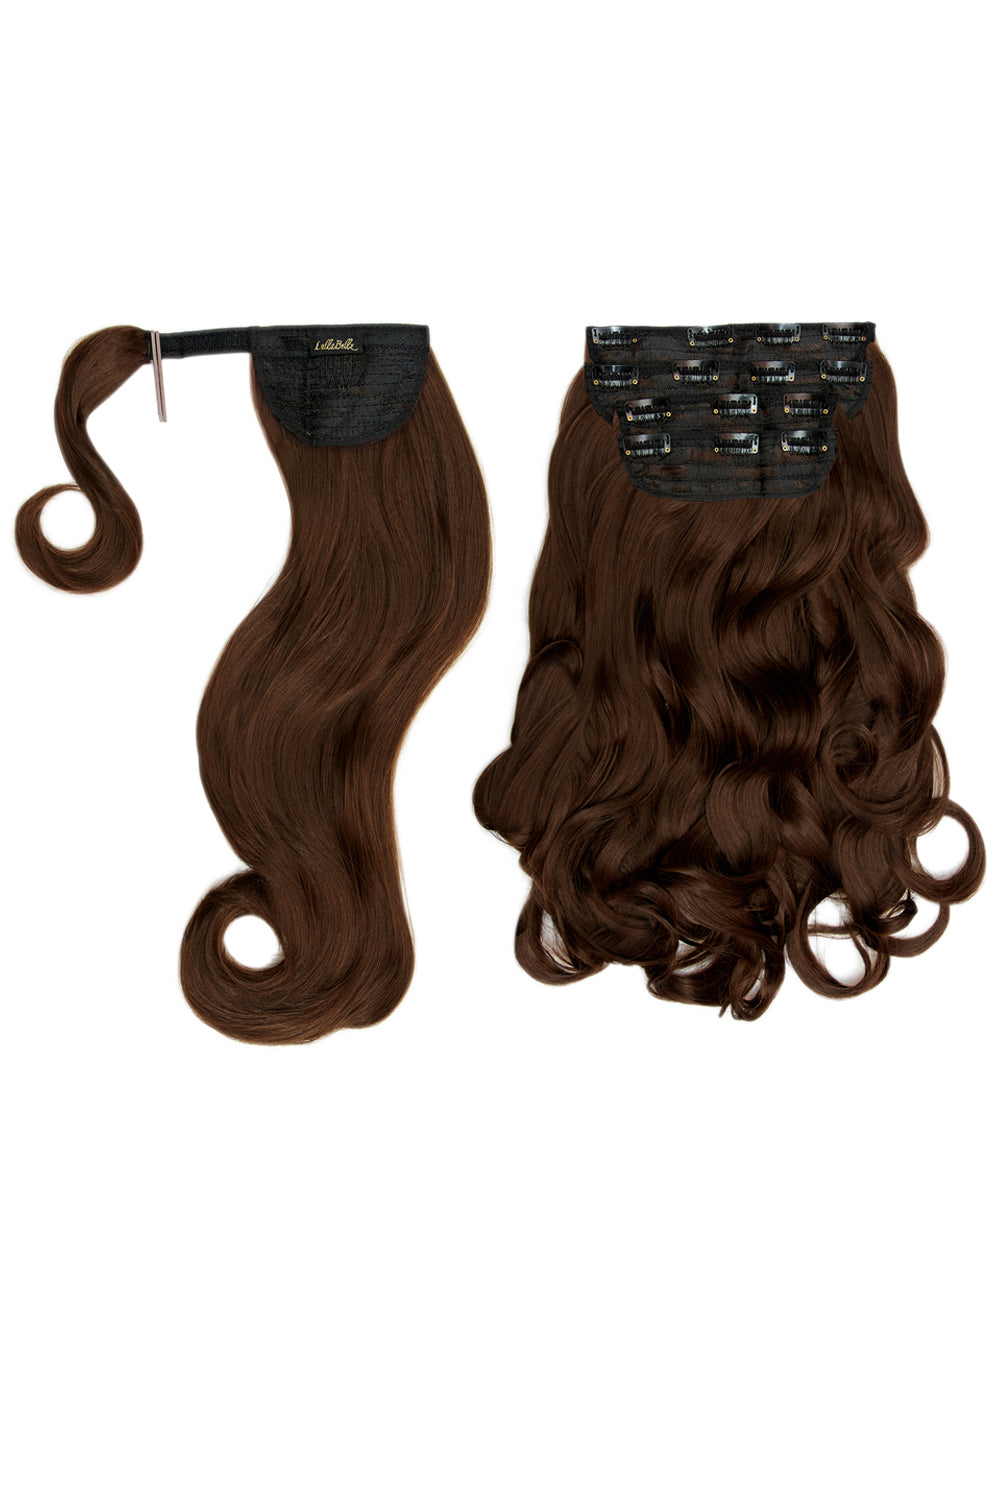 Ultimate Half Up Half Down 22’’ Curly Extension and Pony Set - Golden Brown